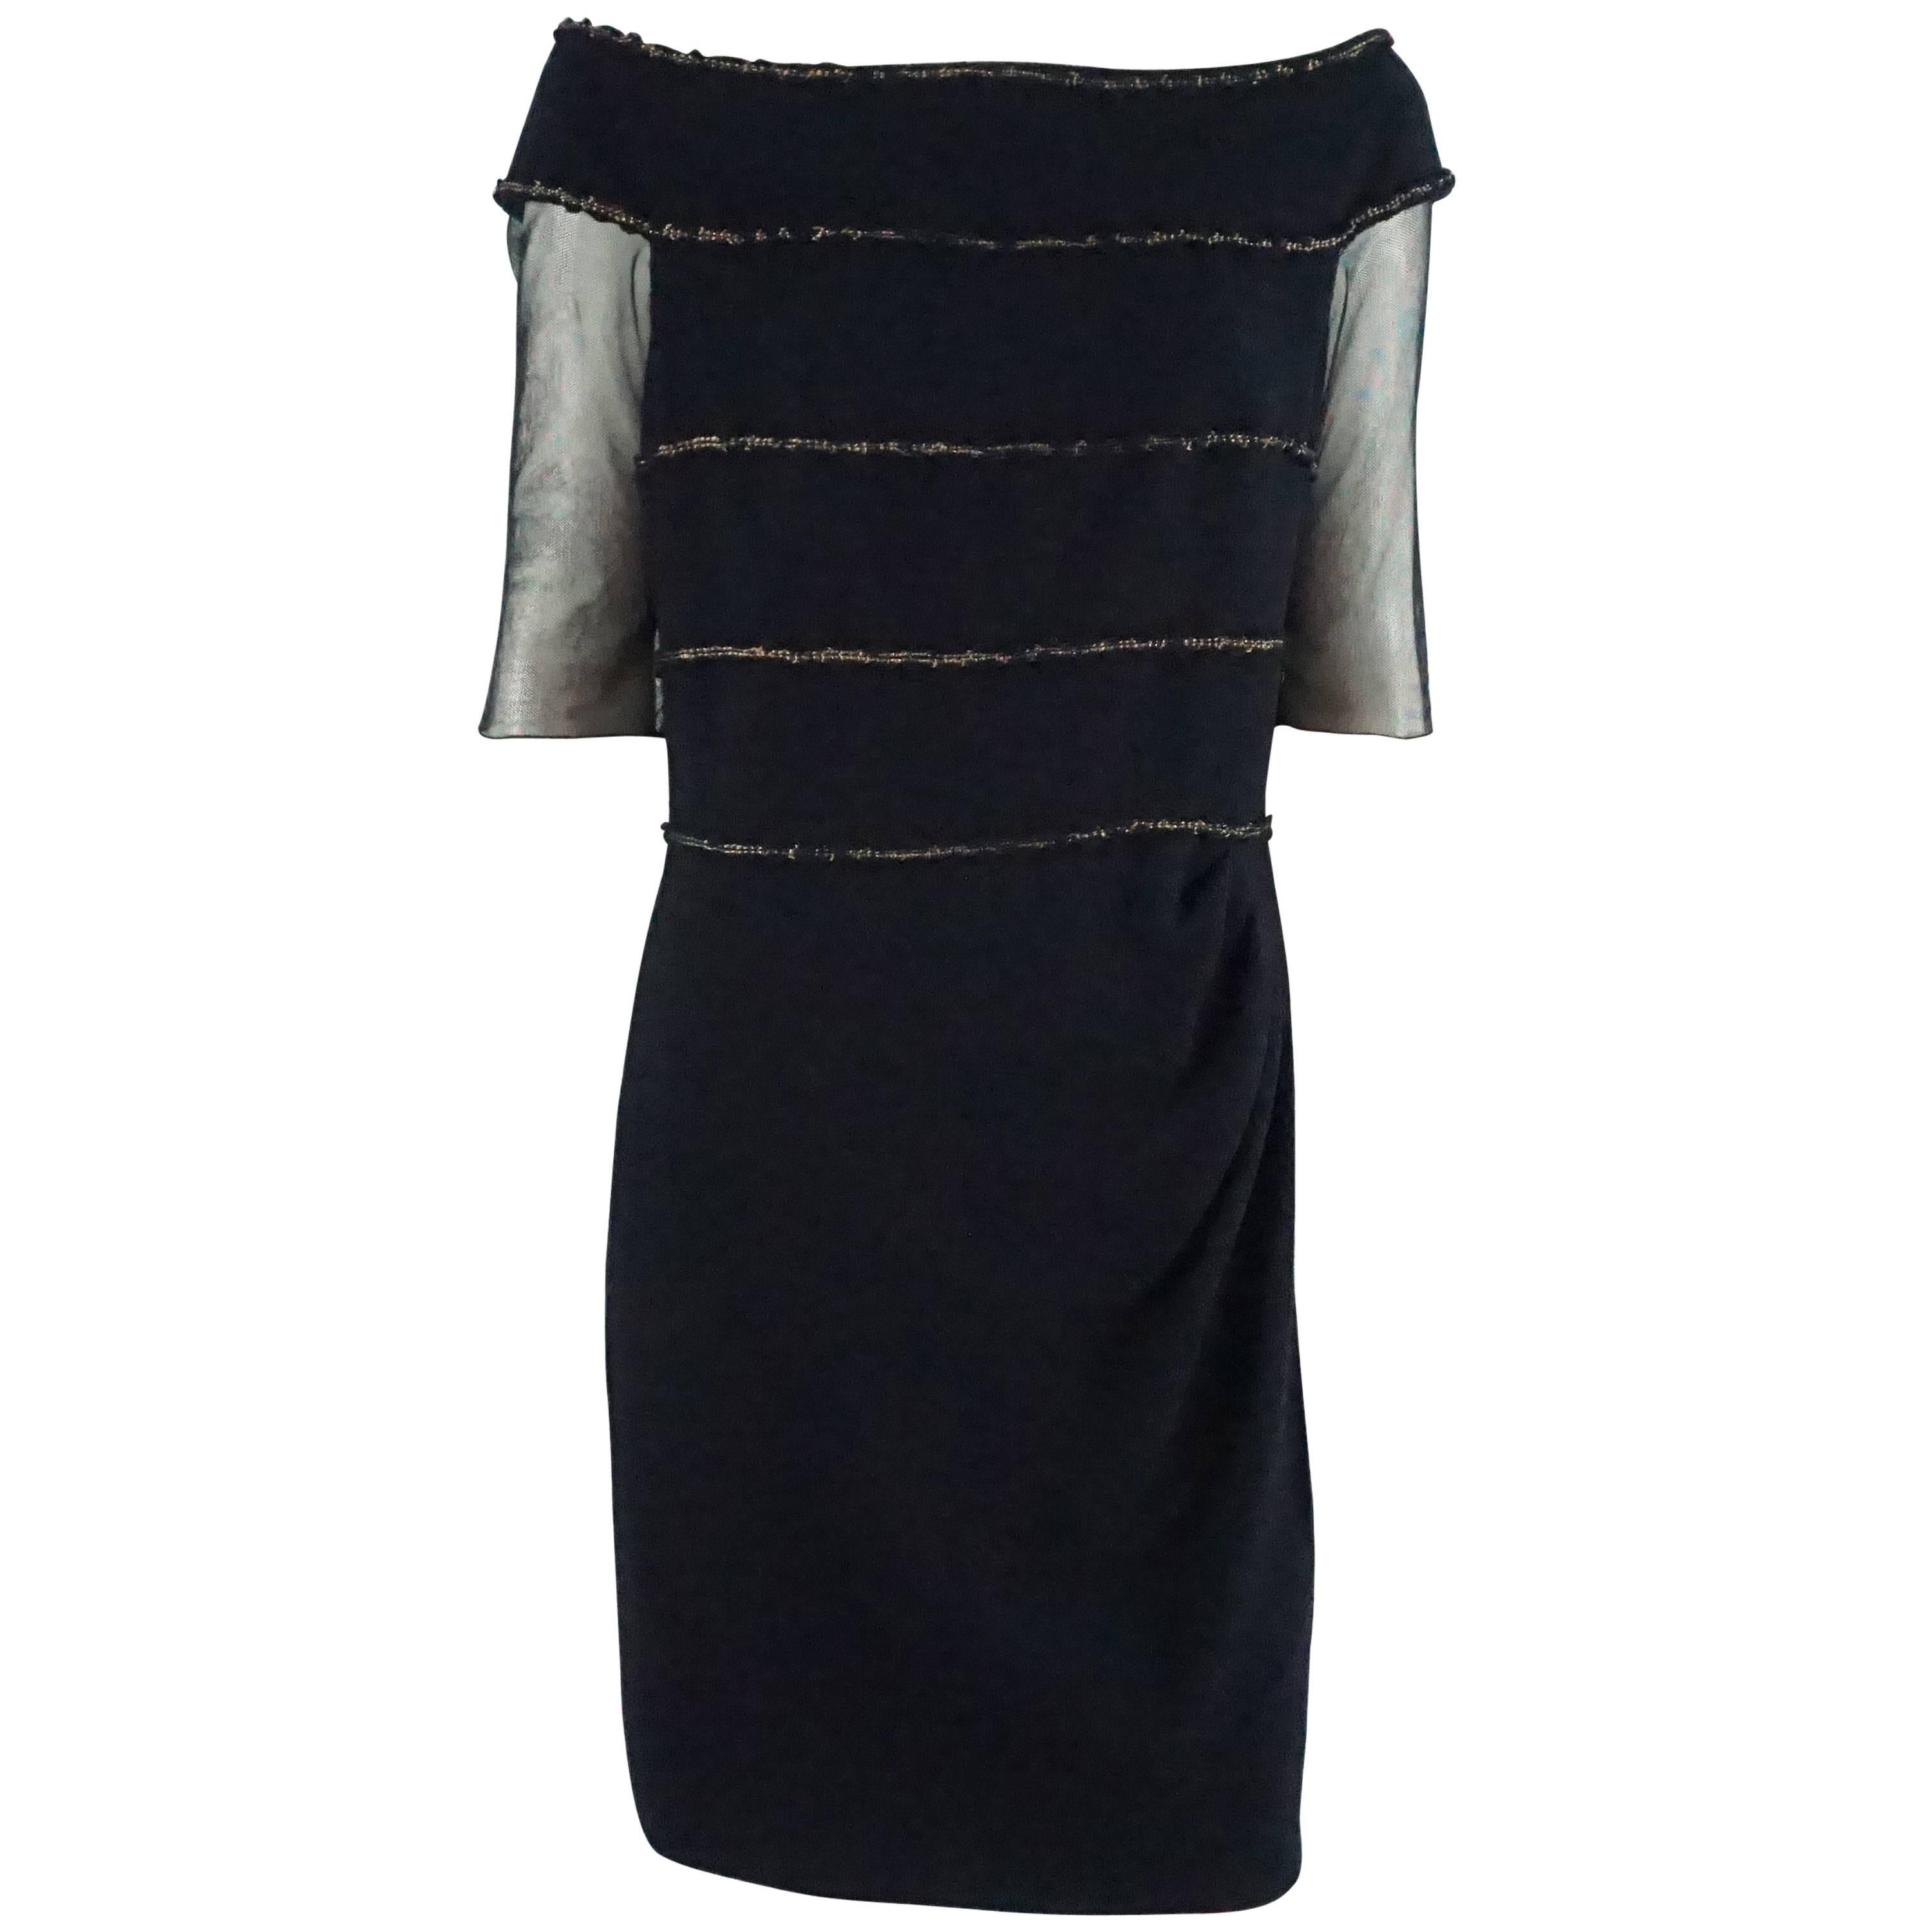 Chanel Navy Wool Dress with Mesh Sleeves - 42